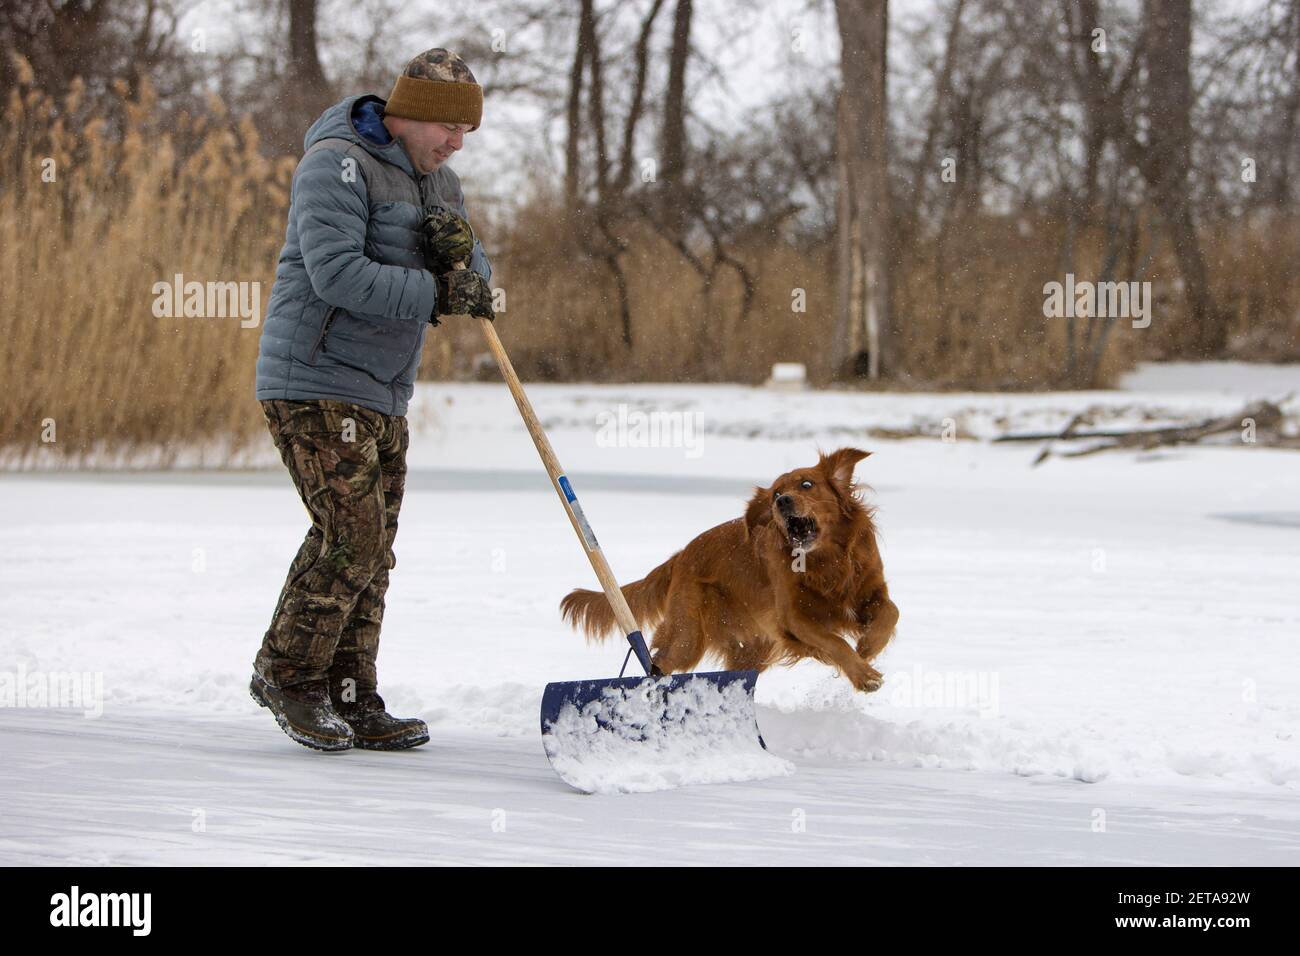 Man with an excited dog shoveling snow on a pond. Stock Photo